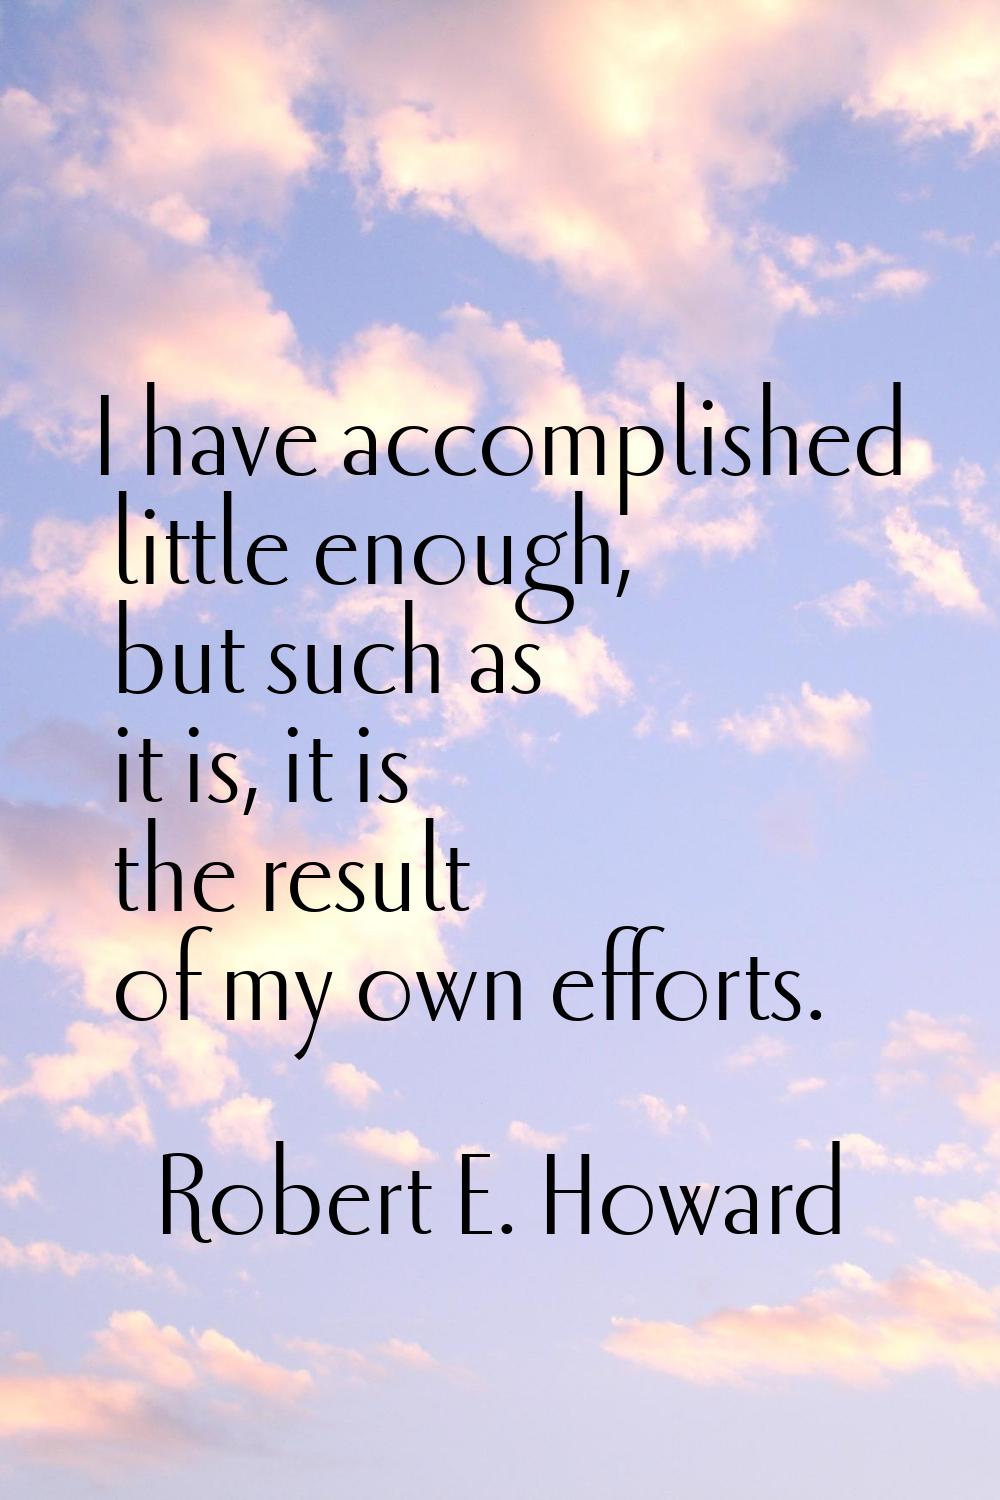 I have accomplished little enough, but such as it is, it is the result of my own efforts.